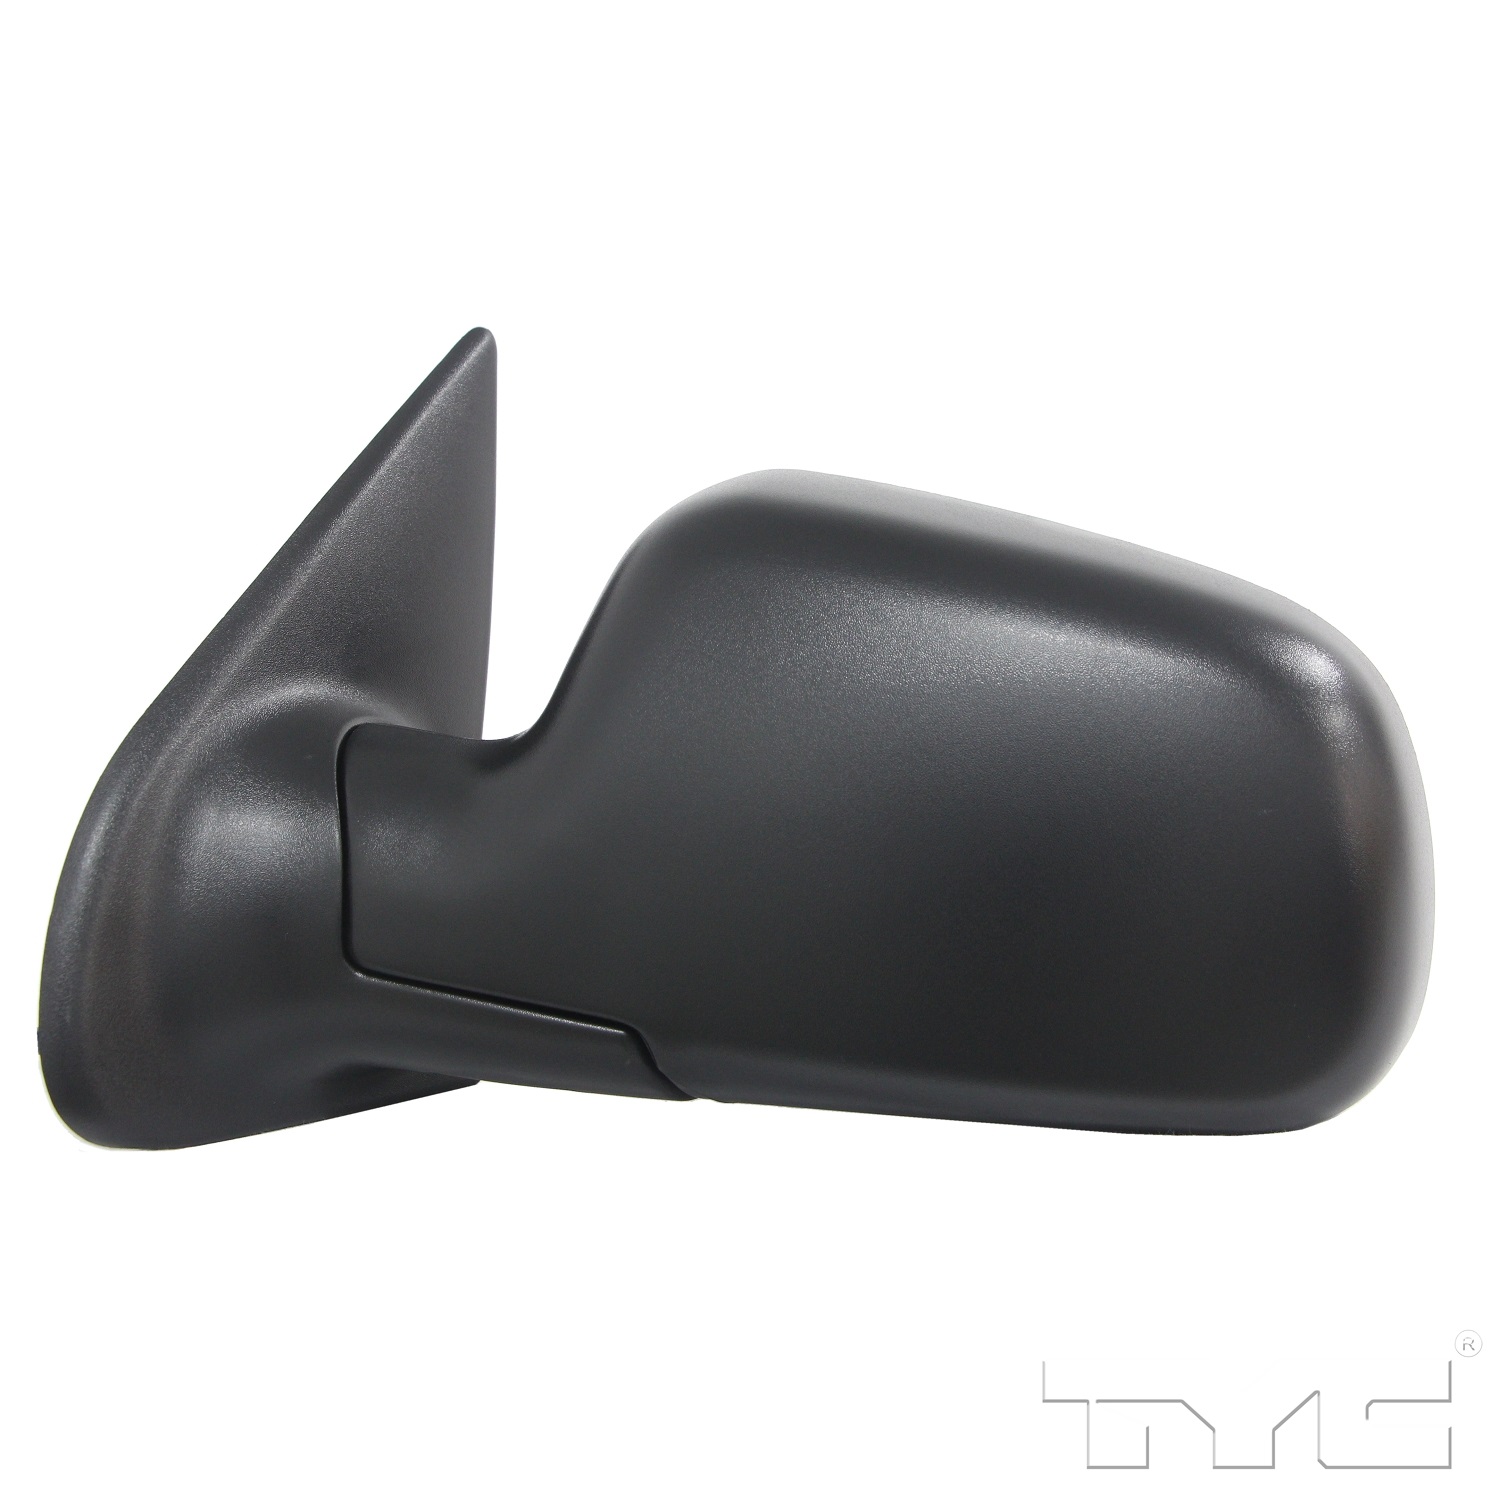 Aftermarket MIRRORS for JEEP - GRAND CHEROKEE, GRAND CHEROKEE,99-04,LT Mirror outside rear view